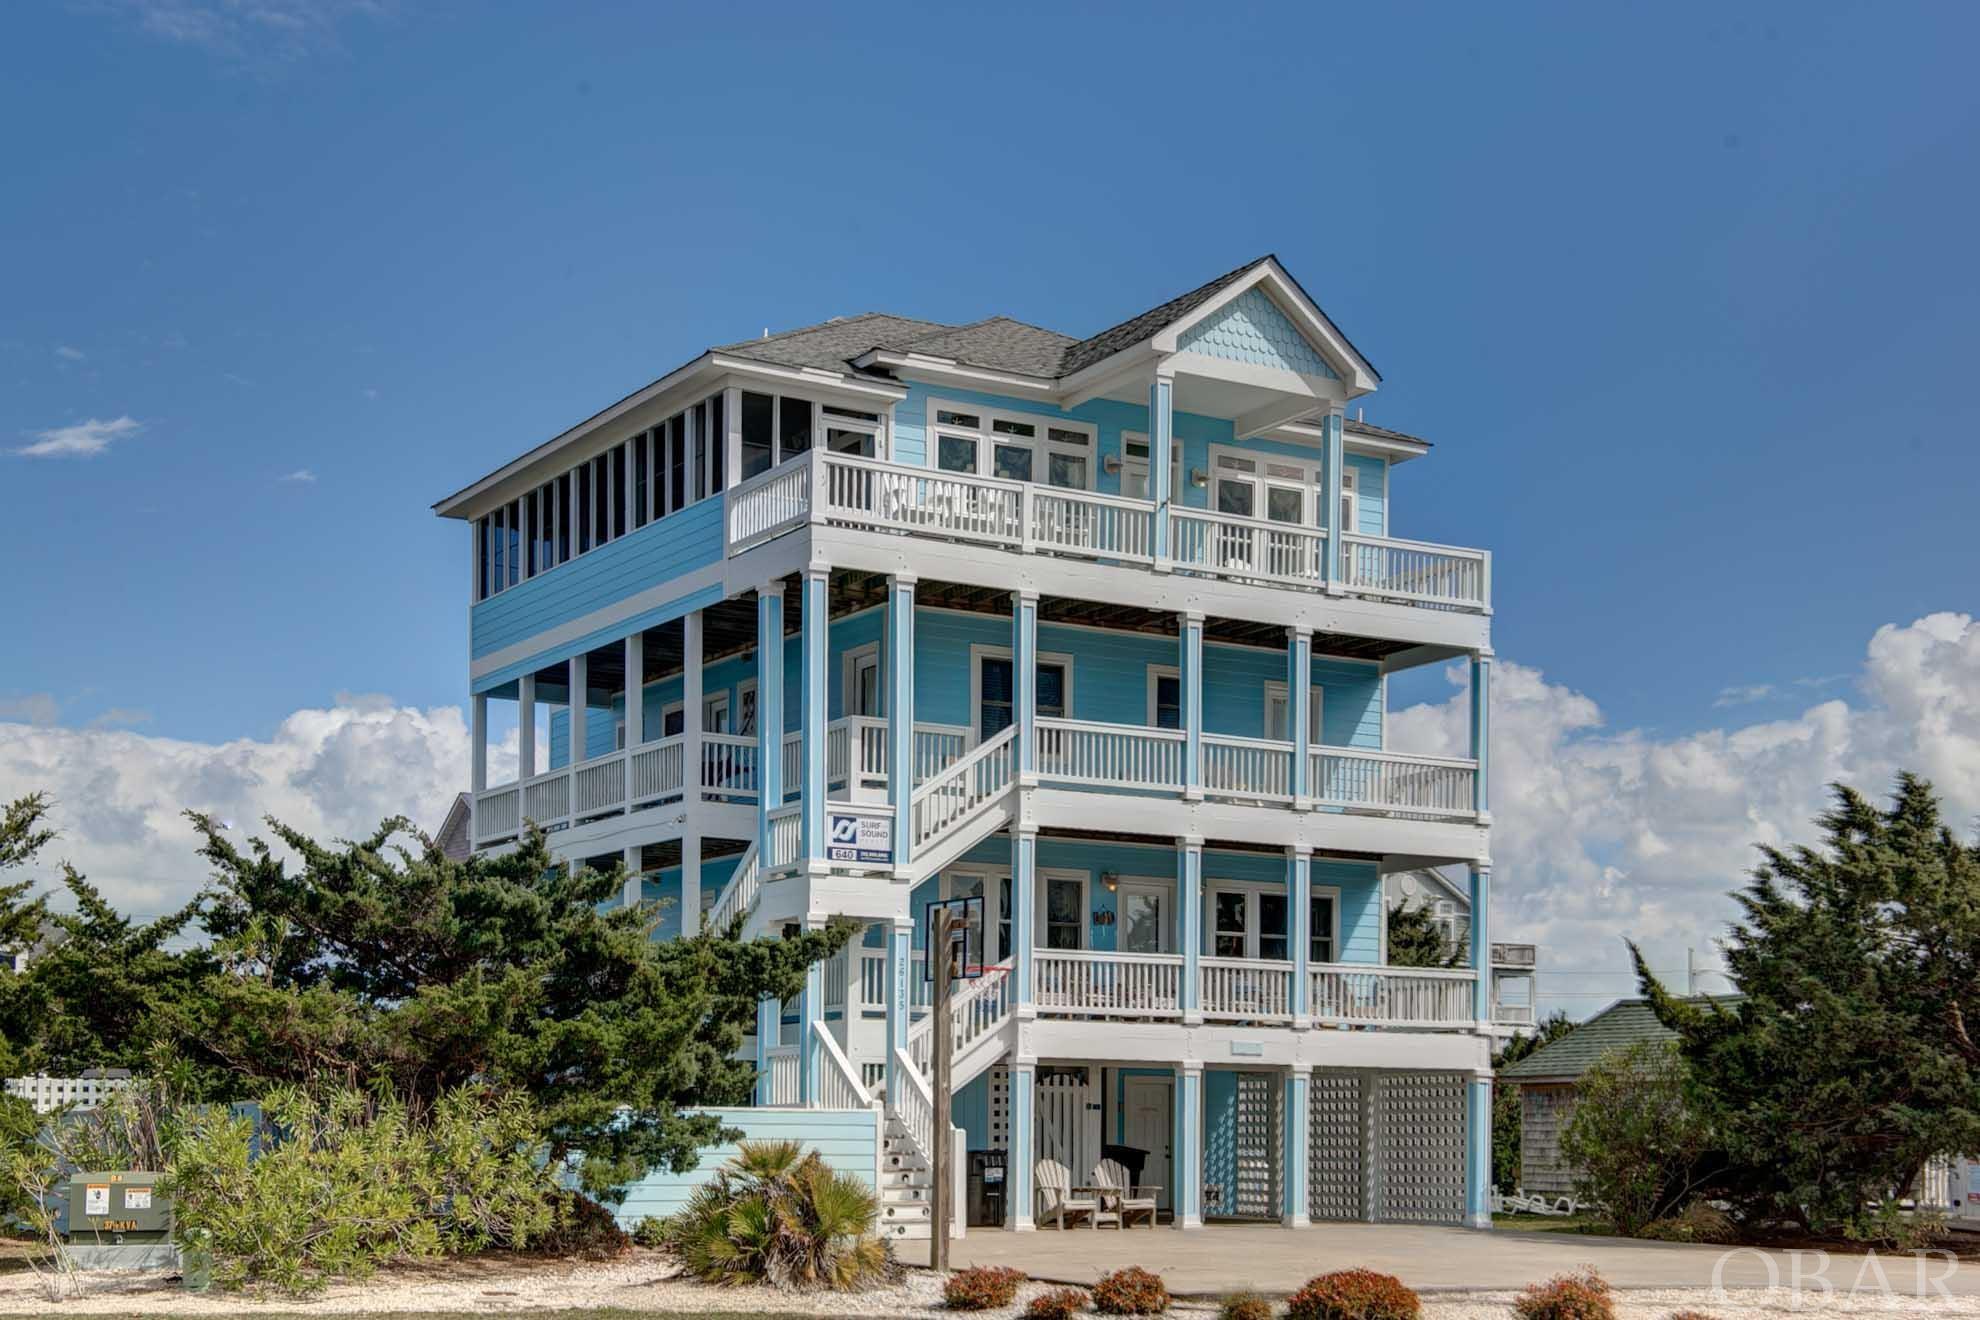 Your search for the home-that-has-it-all is complete!  "Frolic Inn" is the ultimate vacation/investment home sporting a beautiful & delightful beach decor - and comes "equipped" with gorgeous sound and marsh views, sunsets, and stunning dark sky views. Frolic Inn's upper level offers a grand Pamlico Sound vista; comfortable and tasteful furnishings; a lovely cook's kitchen with two dishwashers and two stoves; dining for fourteen; a huge sun deck; a nicely furnished screened porch; and elevator access to each floor and the ground level.  The master on this level has deck/screened porch access and compartmented bath and vanity areas. Welcoming, "themed" bedrooms on the next levels add to the total beach experience; each is cheerfully painted and decorated with its own coastal motif and each offers shaded outside/deck access with sloped ramp access from each bedroom.  Outside on the ground level, you can take your pick from the large private pool; children's pool & sandbox; screened Tiki bar (cable-tv-ready) with hot tub and built-in picnic area; volleyball; horseshoes; basketball; and two ample storage areas for guest items. Unique, first-rate items abound: trex decking/landings; swiveling door curtain rods; 2x6 framing; 3 course rebar construction in elevator shaft; Adura tile and planking; built-in hair dryers in each bath; media room extra sound insulation; generator hookup; and even a cost saving solar-powered hot water heater (and extra new electric standby water heater). The owners have continued a high-quality standard for their home with numerous recent improvements: new range; new dishwashers; top floor HVAC; pool pump & heater; new living area sofa, loveseat, and swivel chairs; new dining room chairs; washer/dryer(s) replaced in 21 and 22; exterior paint; new hot tub motor; new pool table; new hammock; new extra hot water heater; and much more.   Neighborhood amenities include the WOW community boat ramp/dock and boardwalk AND beach access thru reciprocal agreement with oceanside Hatteras Colony s/d. Nearby attractions are the TriVillage walk/bike path; local shopping and dining; NPS Salvo day use area; and 4WD beach access at the south end of the village. Come see all this lovely home and great location have to offer!